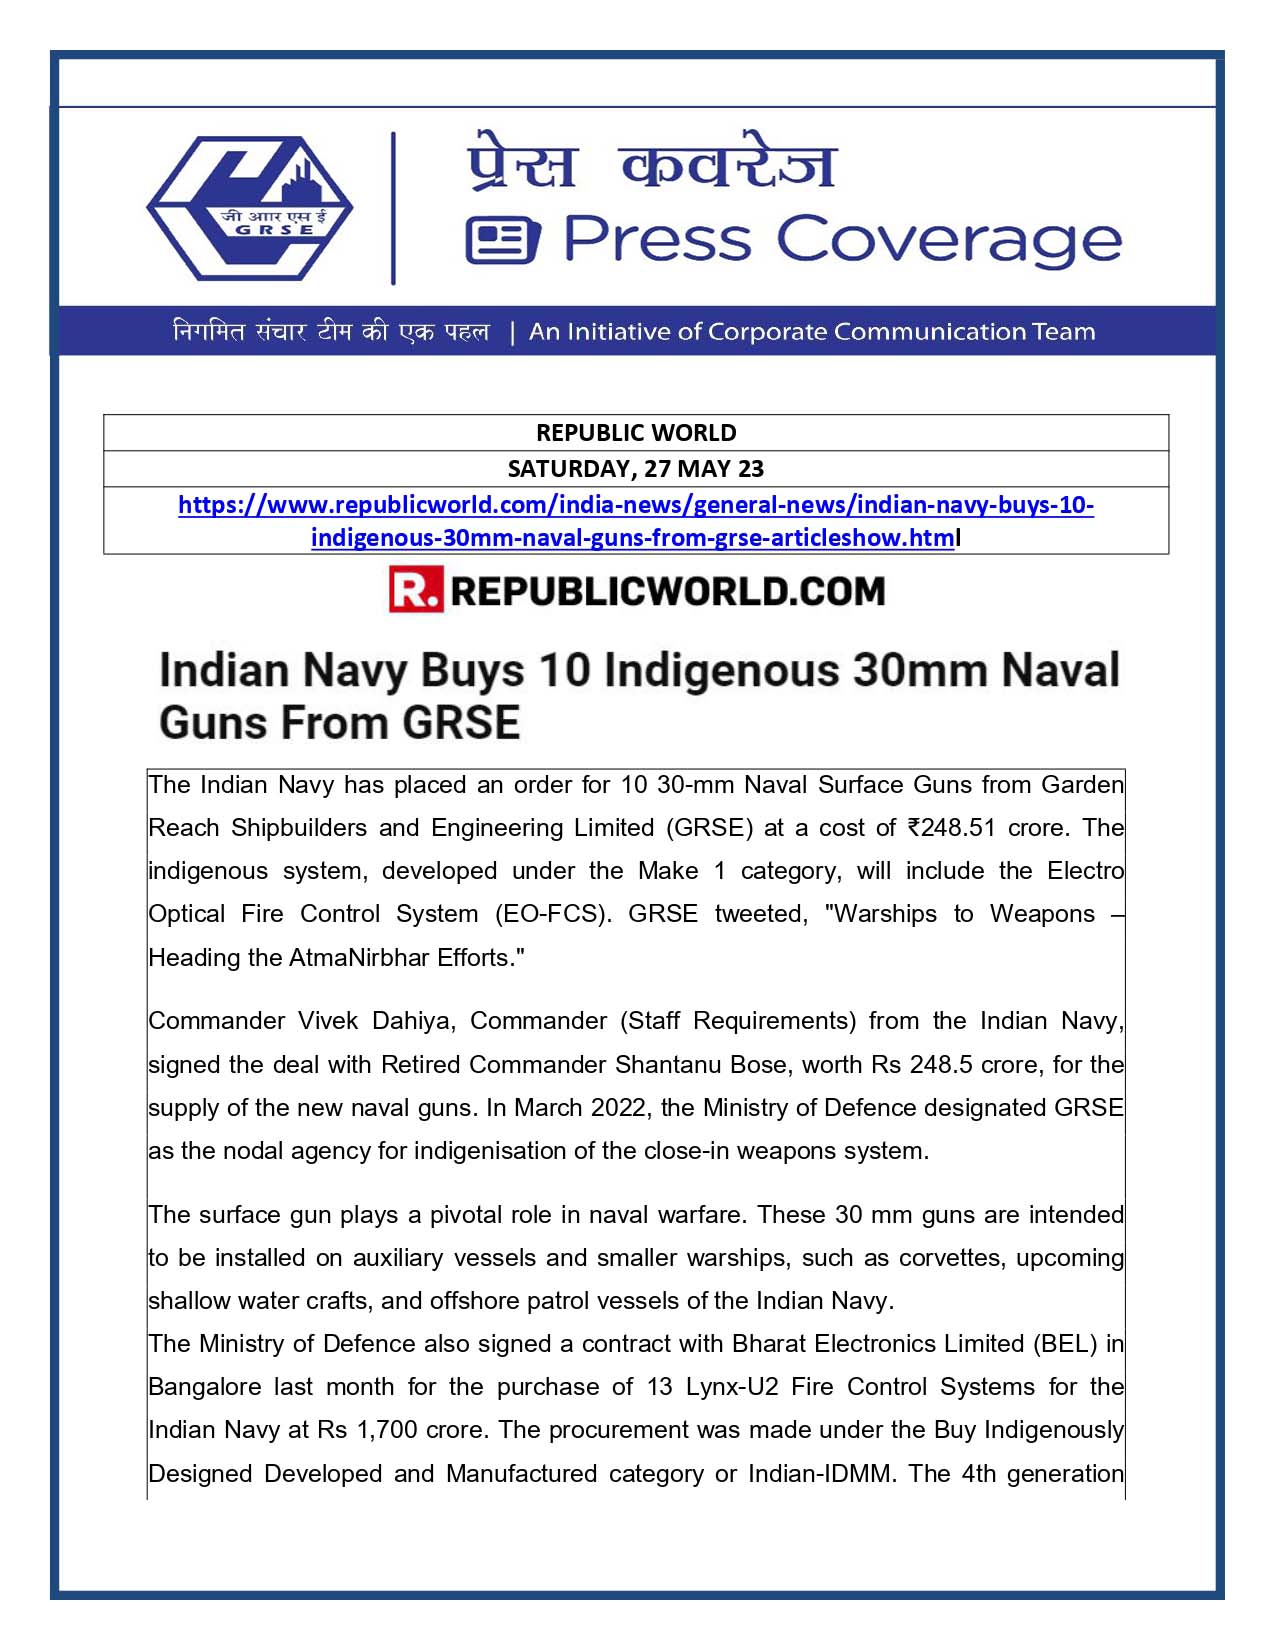 Indian Navy buys 10 Indigenous 30mm Naval Guns from GRSE